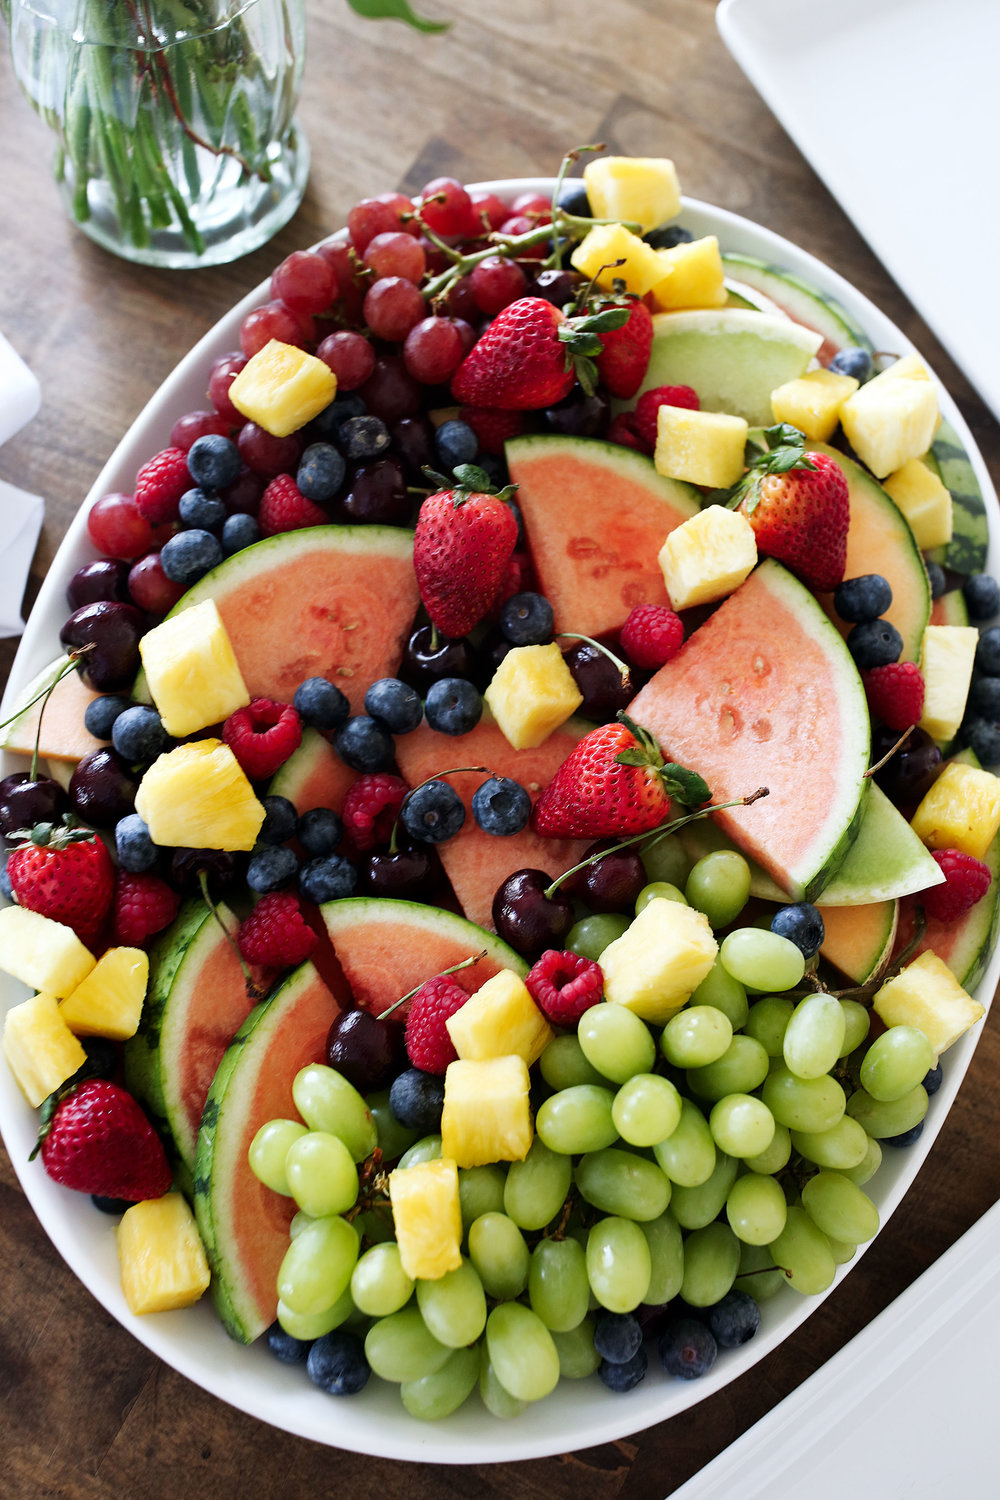 fruit salad with watermelon strawberries melon pineapple cherries and blueberries
